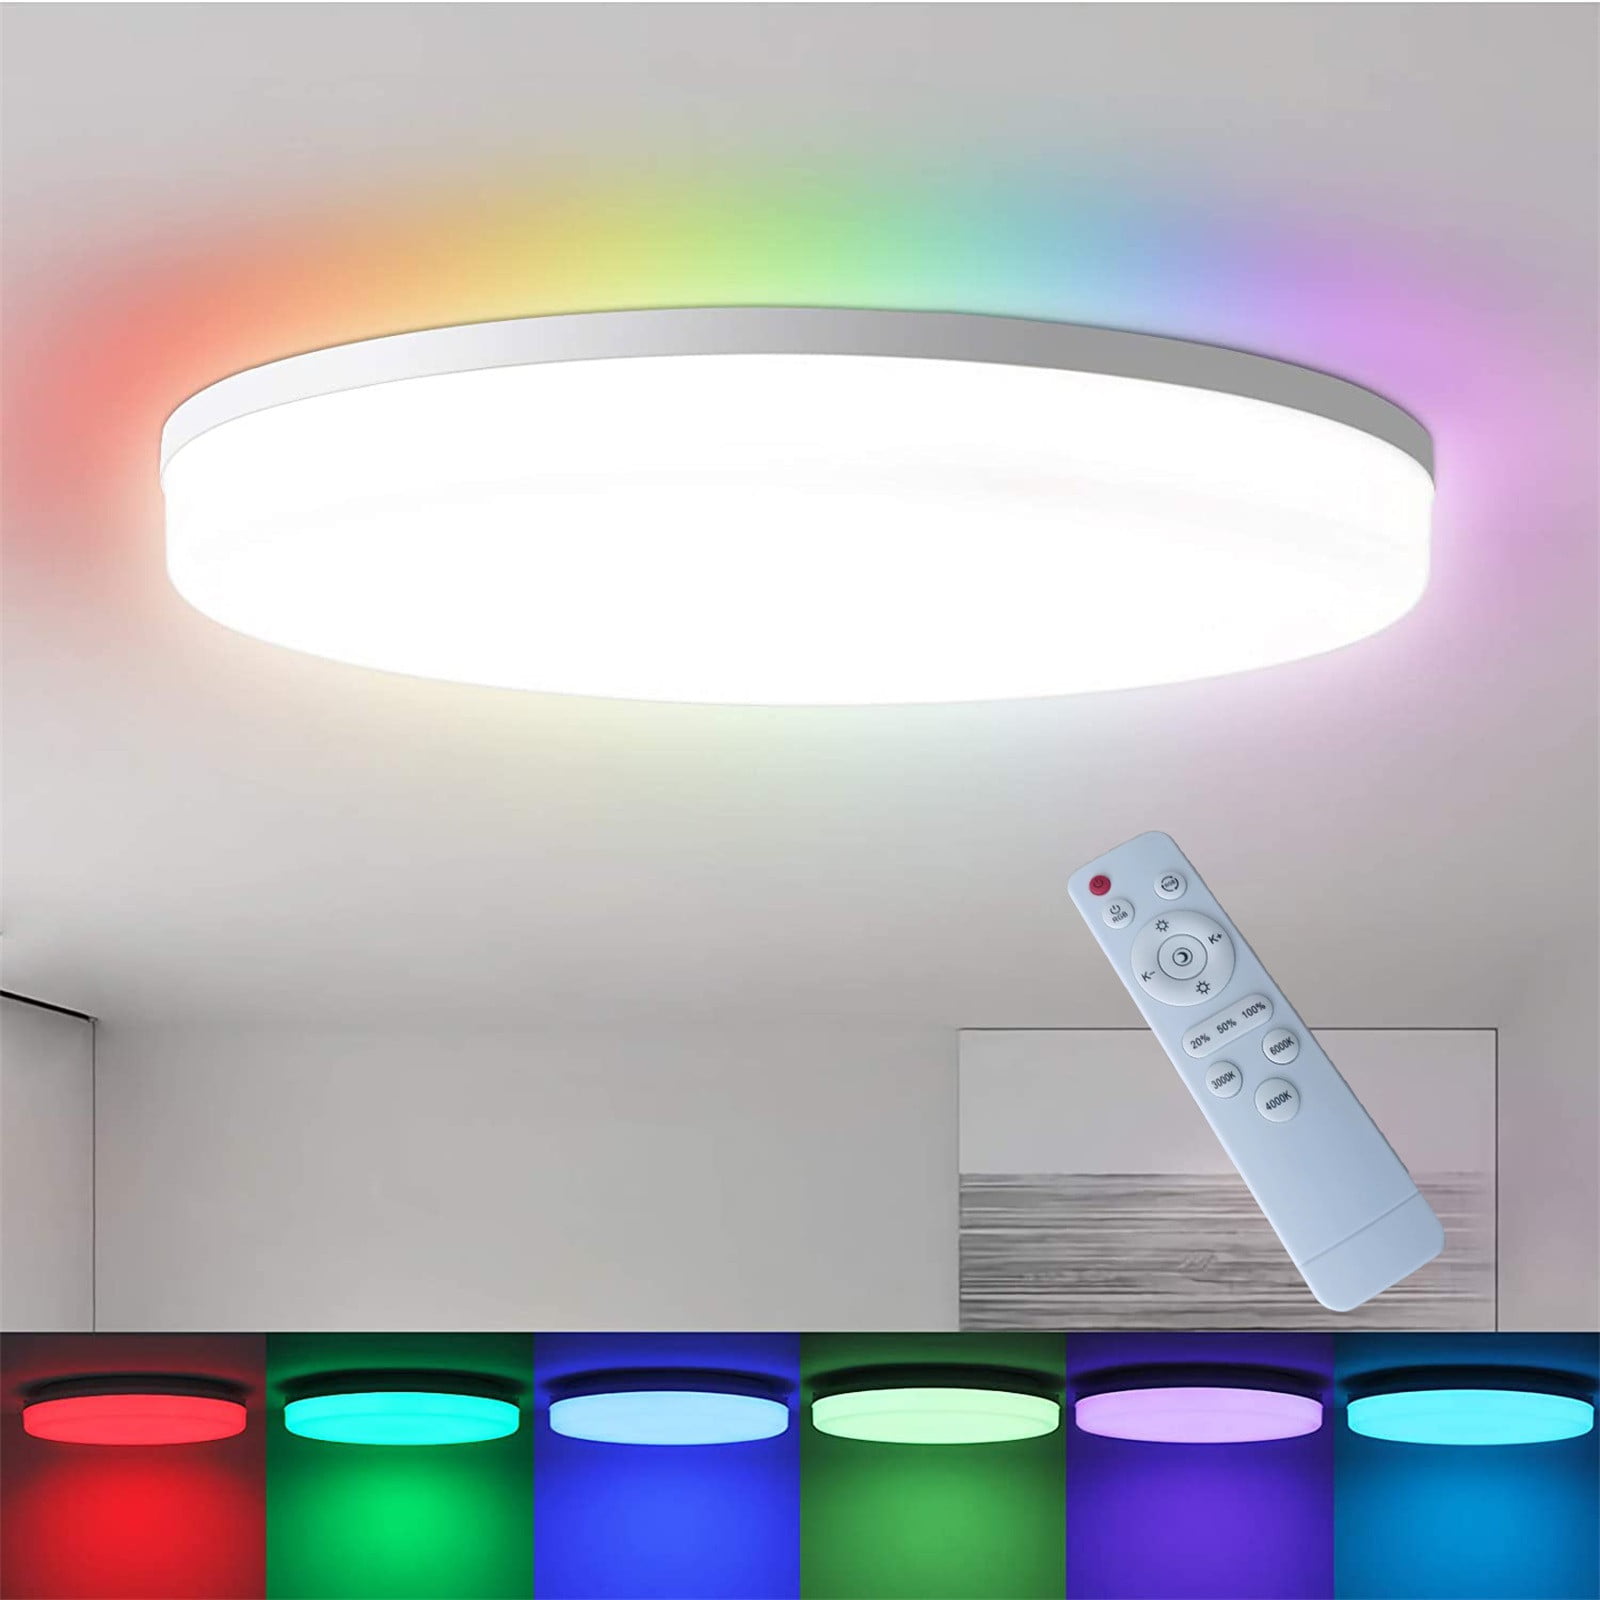 XEOVHV Embedded Intelligent Ceiling Ceiling WiFi money Adjustable-backlight best for Alexa Intelligent Lamp Compatible LED saving And choice The Lamp WiFi